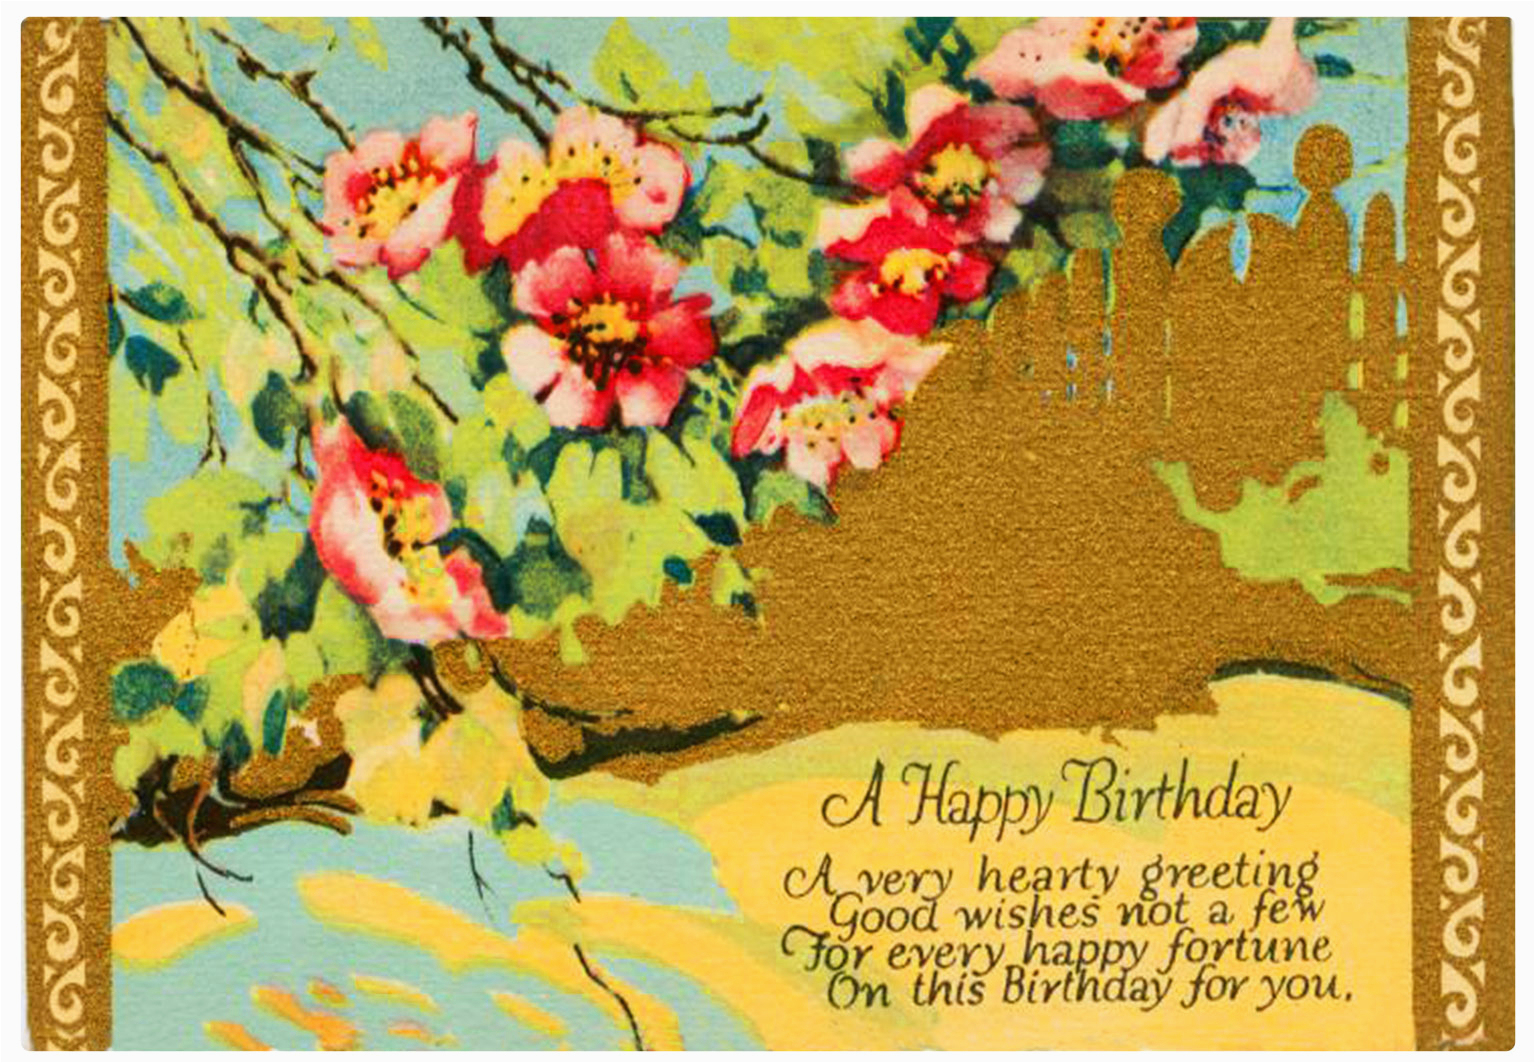 Make Birthday Cards Online For Free | Birthdaybuzz - Make Your Own Printable Birthday Cards Online Free